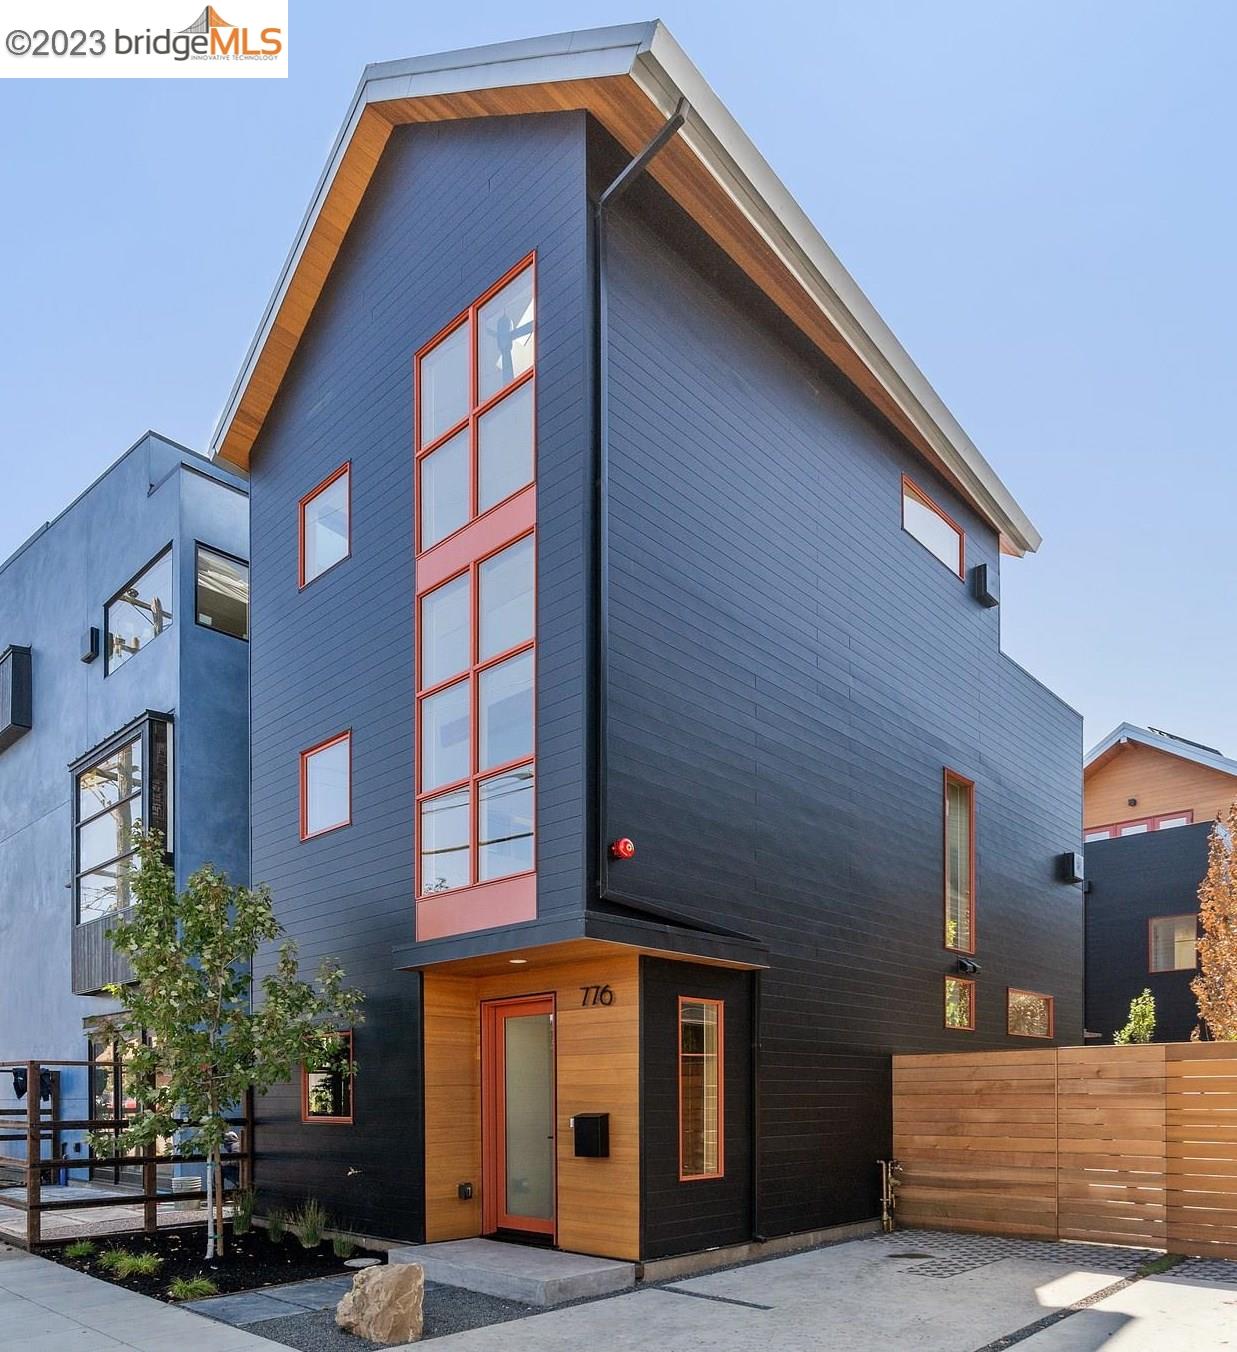 Brand new construction and meticulously designed three-bedroom, two and a half-bathroom home in the heart of West Berkeley. Just a short distance from the thriving Fourth Street shops, Gilman District and numerous urban wineries and breweries. This freestanding home offers an emphasis on sustainability and energy efficient features and comes equipped with preinstalled solar panels, EV charging outlet, an HRV air filtration system and is a 100% electric energy efficient home. Vertically configured to capture three stories of thoughtfully-defined space, with a lofted primary bedroom / flex space on the third floor that has a spacious patio surrounded by exceptional views of the Bay! The second floor is an open concept dining, kitchen and entertaining area drenched in natural light with windows soaring to the peak of the gable roof. The formal entry at street level has gorgeous polished concrete floors and leads to two bedrooms and a private patio / outdoor space with a separate entrance. To see more visit: www.fifthandpage.com